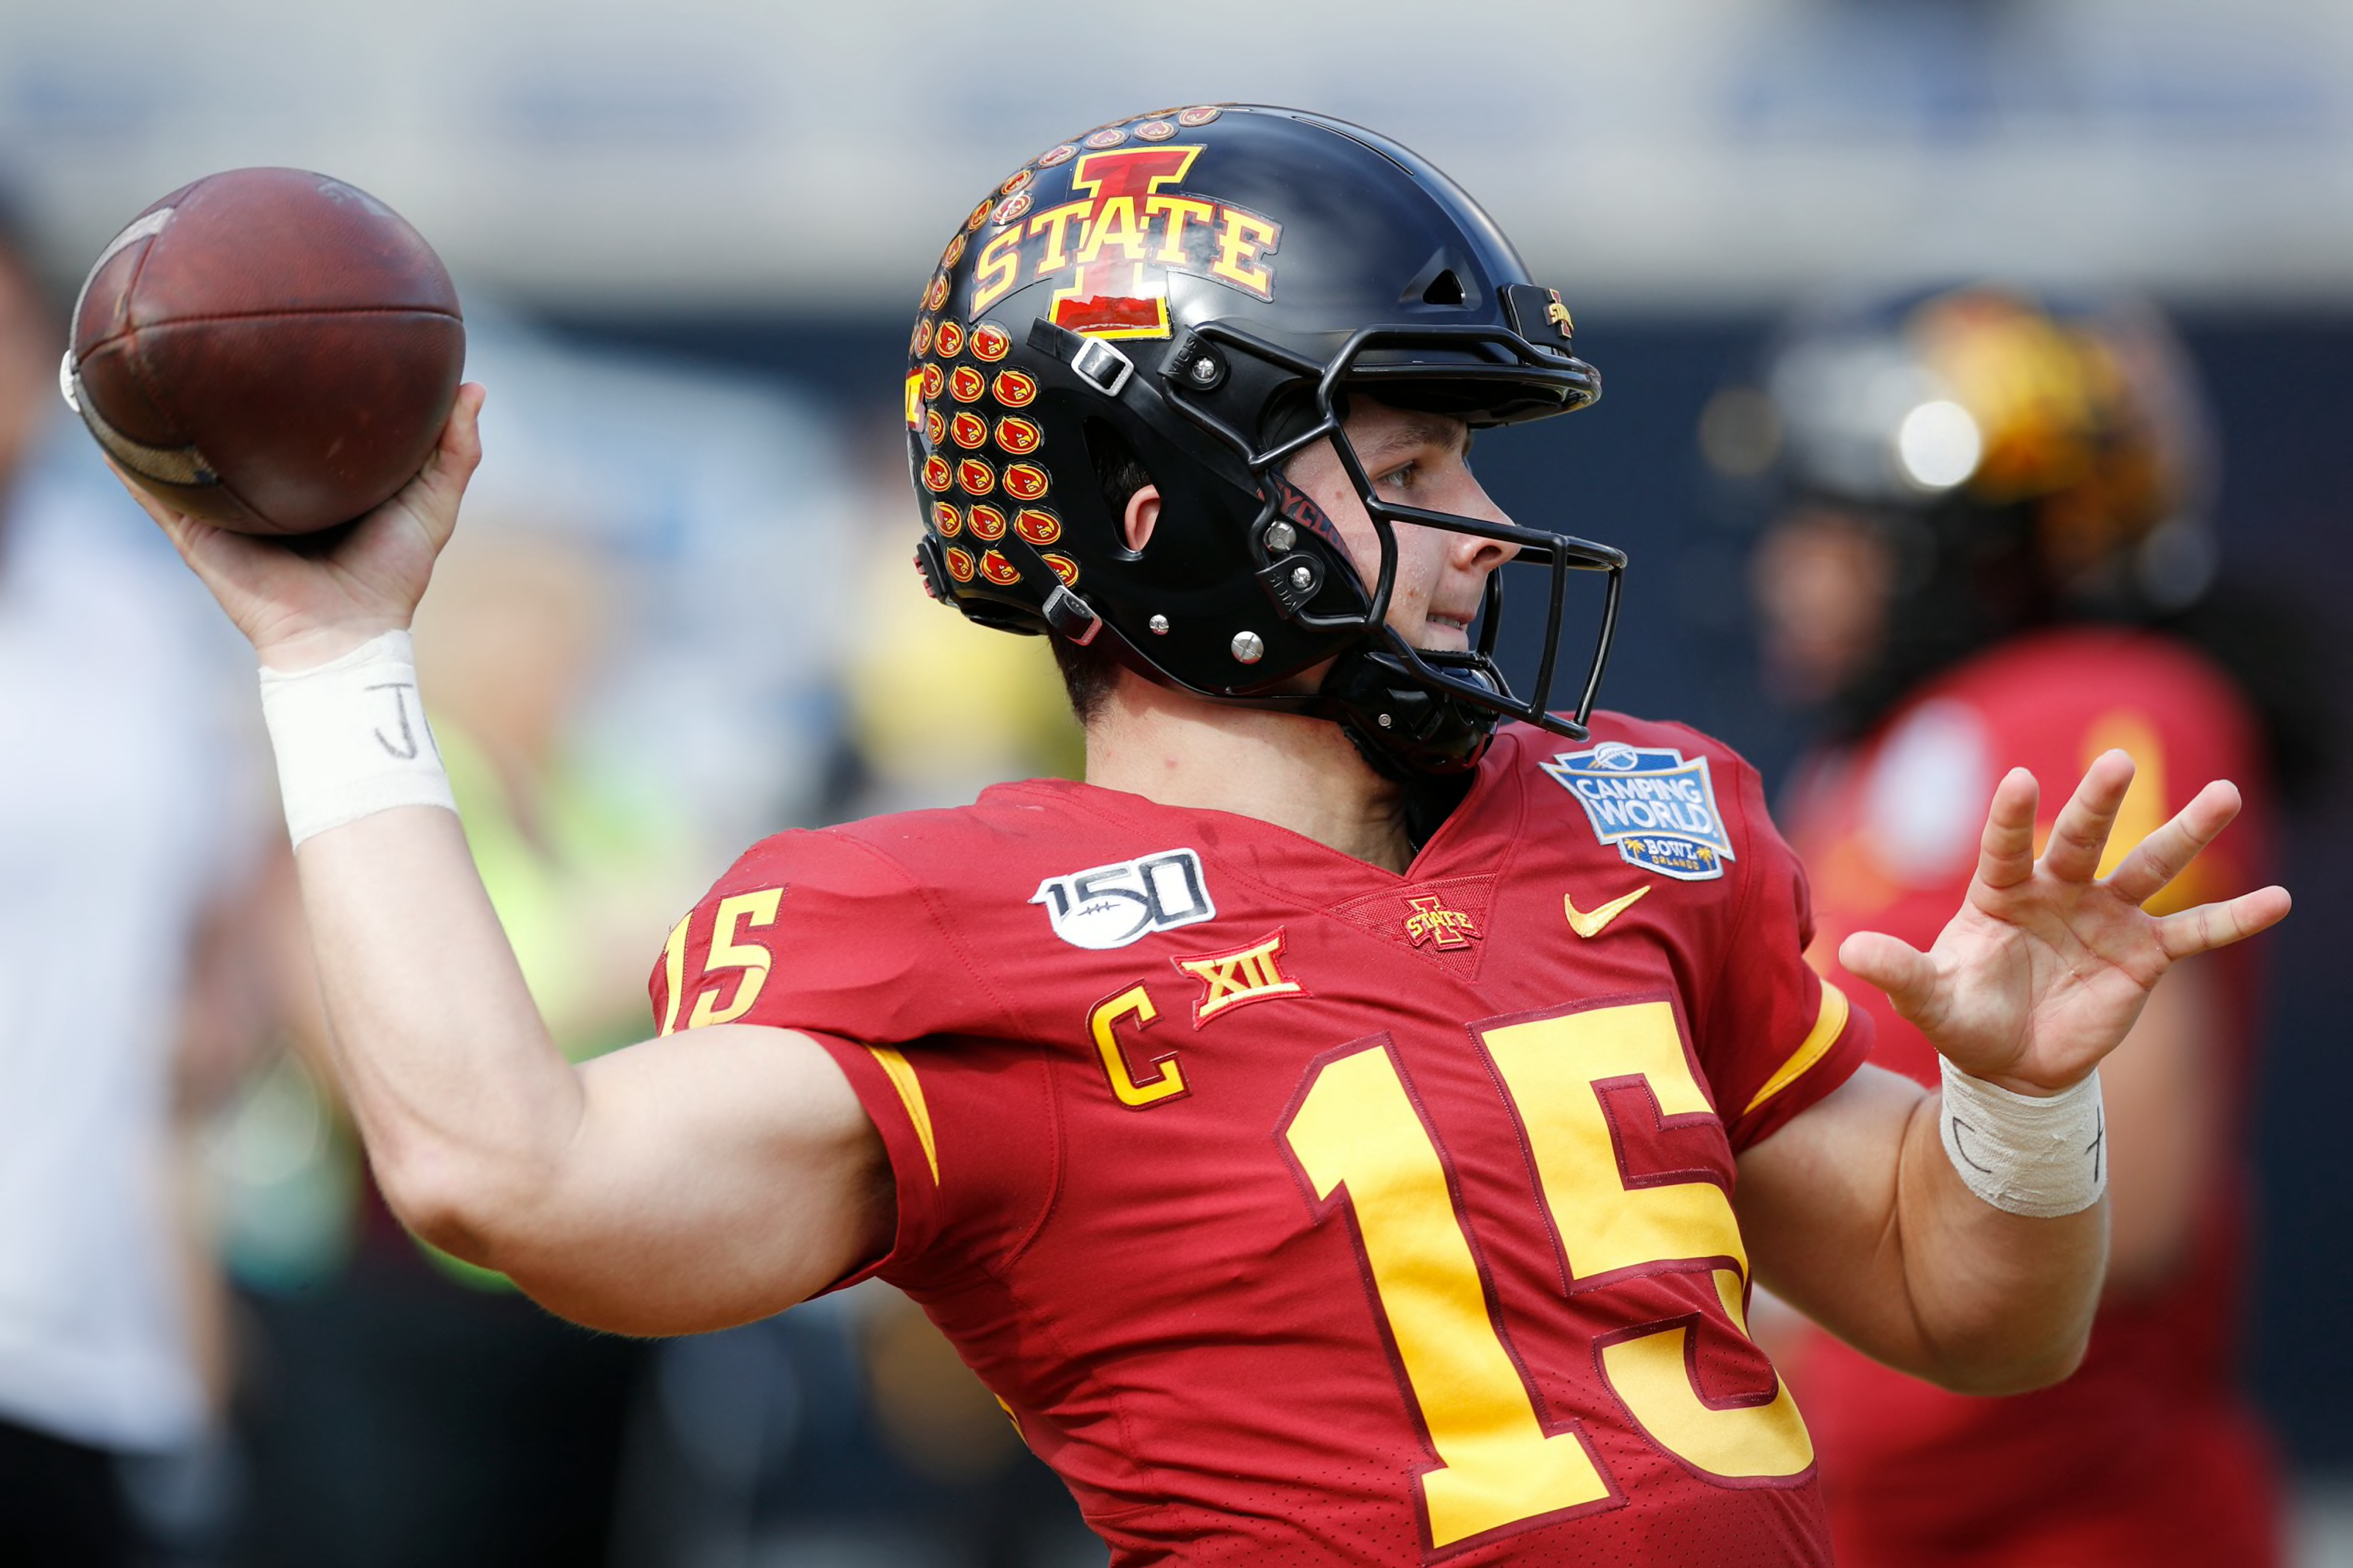 2021 NFL Draft Early look at Iowa State's Brock Purdy